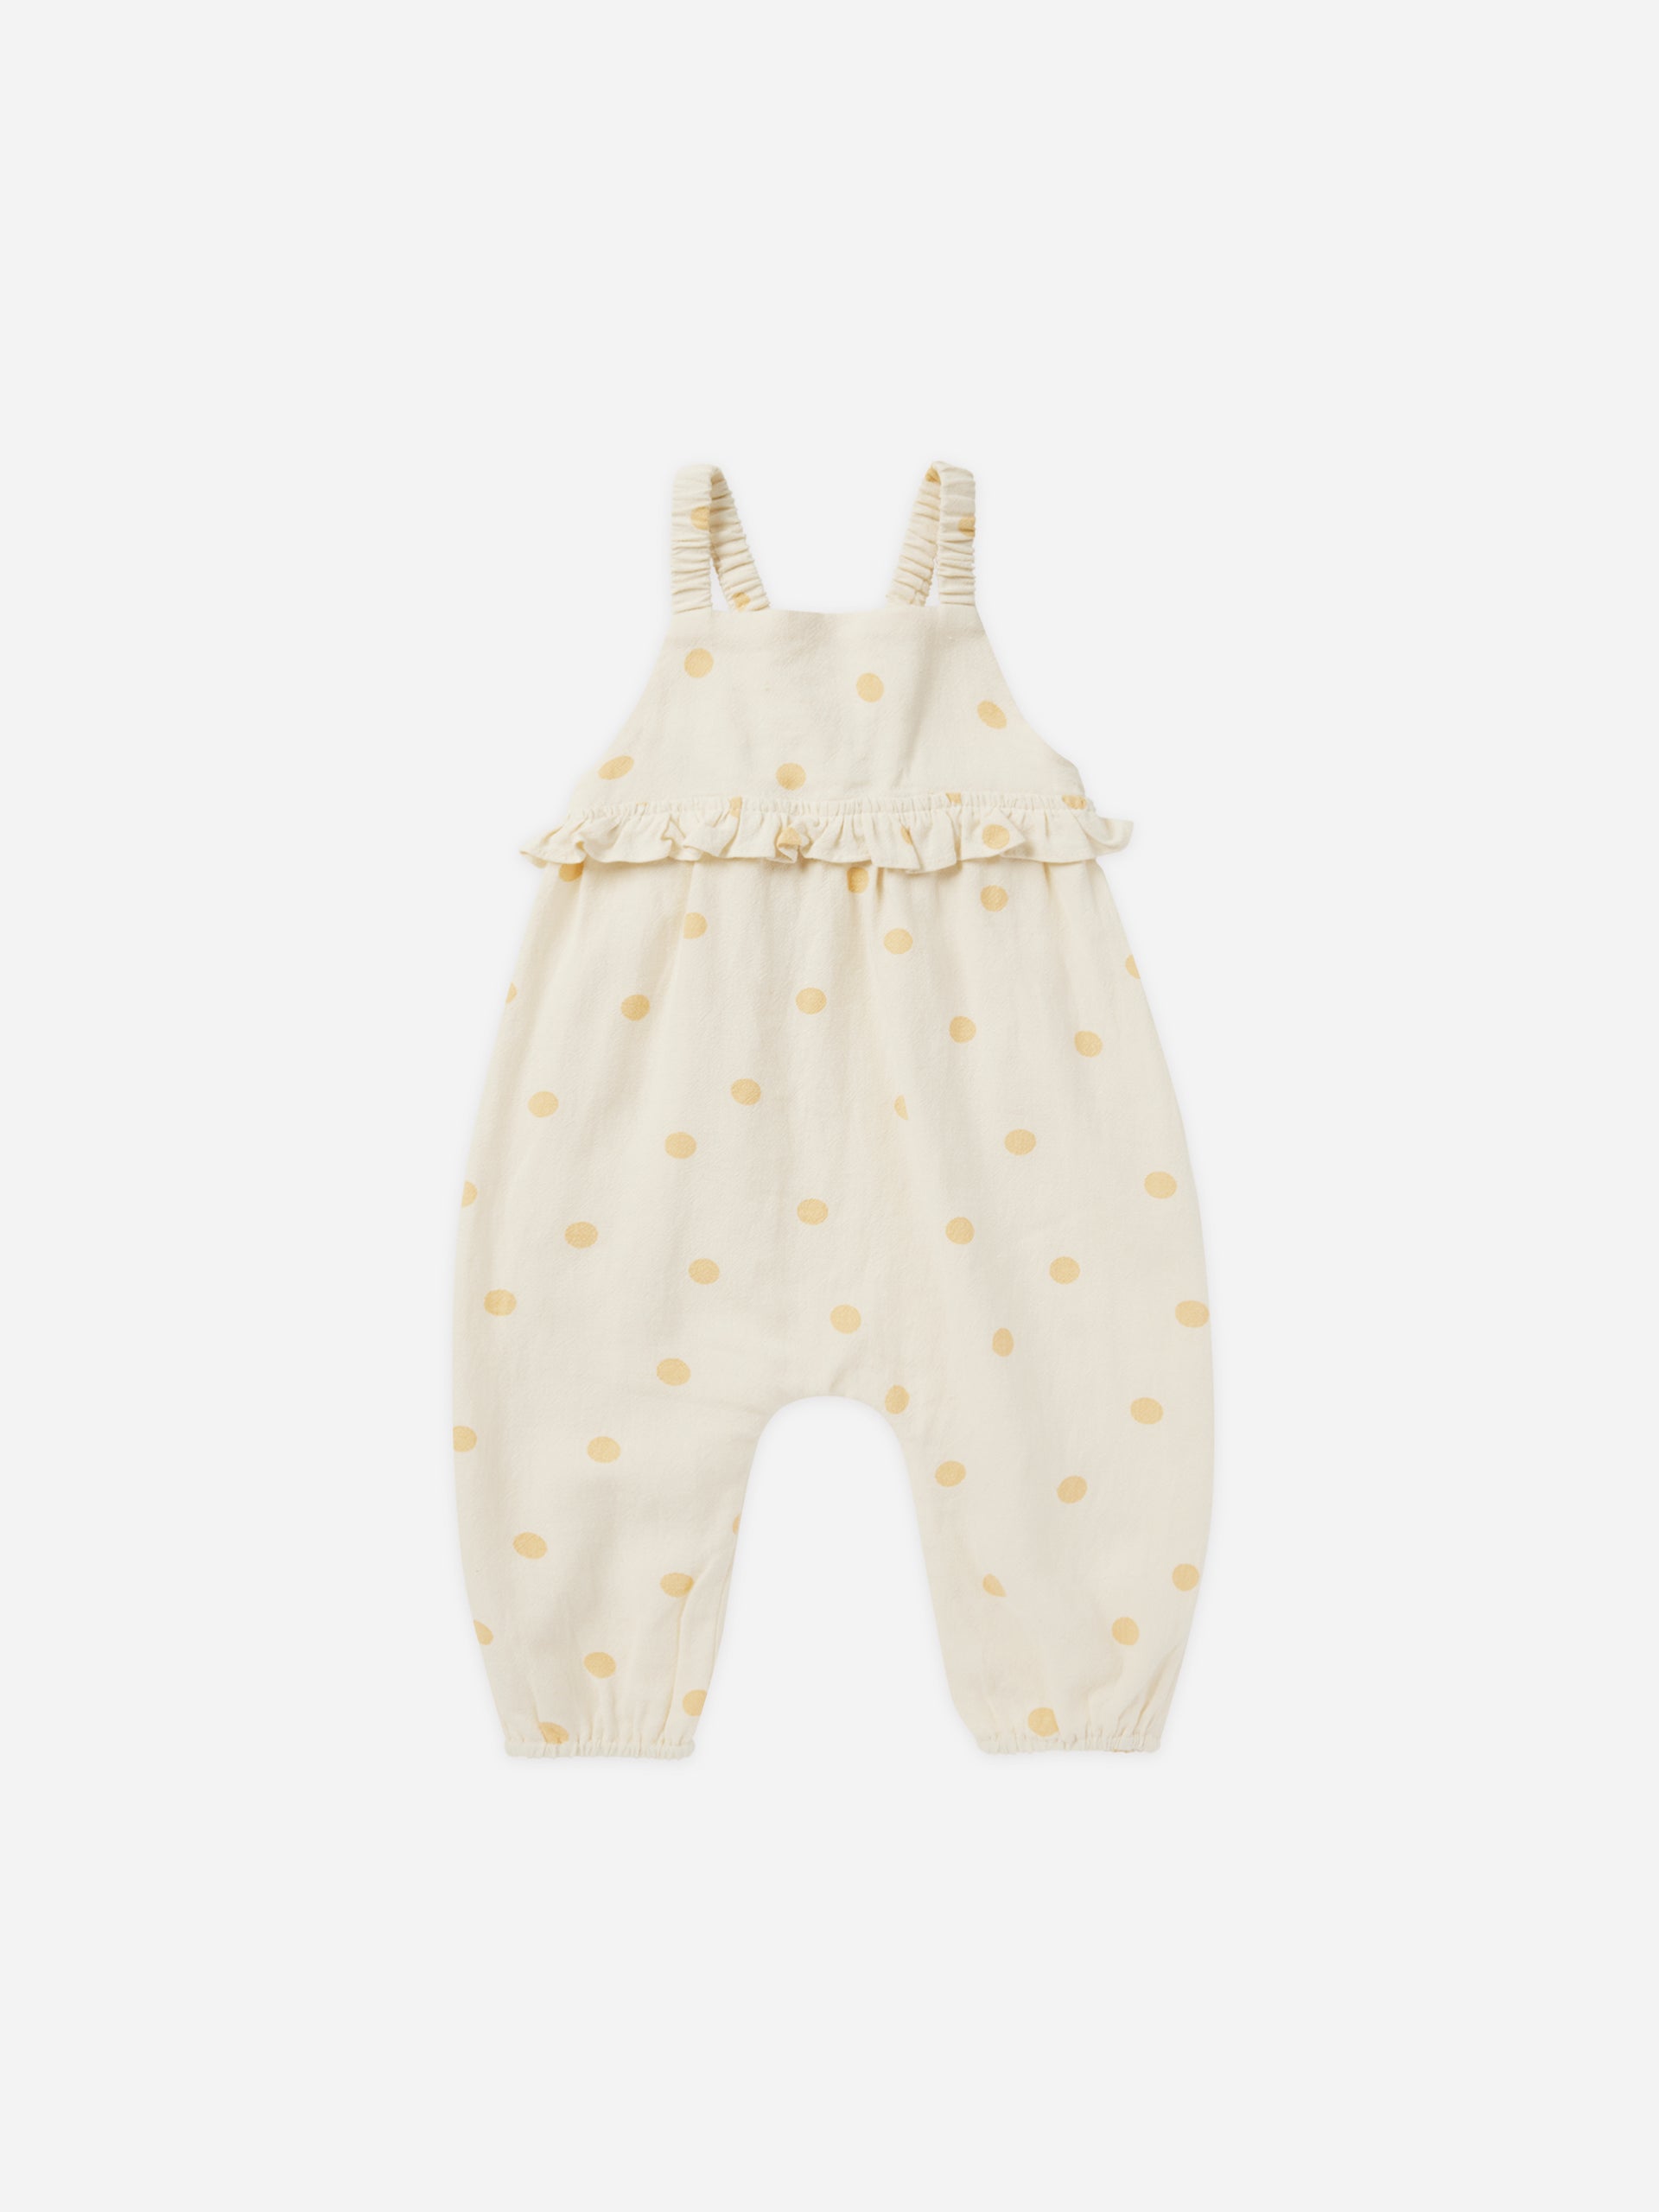 Kinsley Jumpsuit || Yellow Polka Dot - Rylee + Cru | Kids Clothes | Trendy Baby Clothes | Modern Infant Outfits |